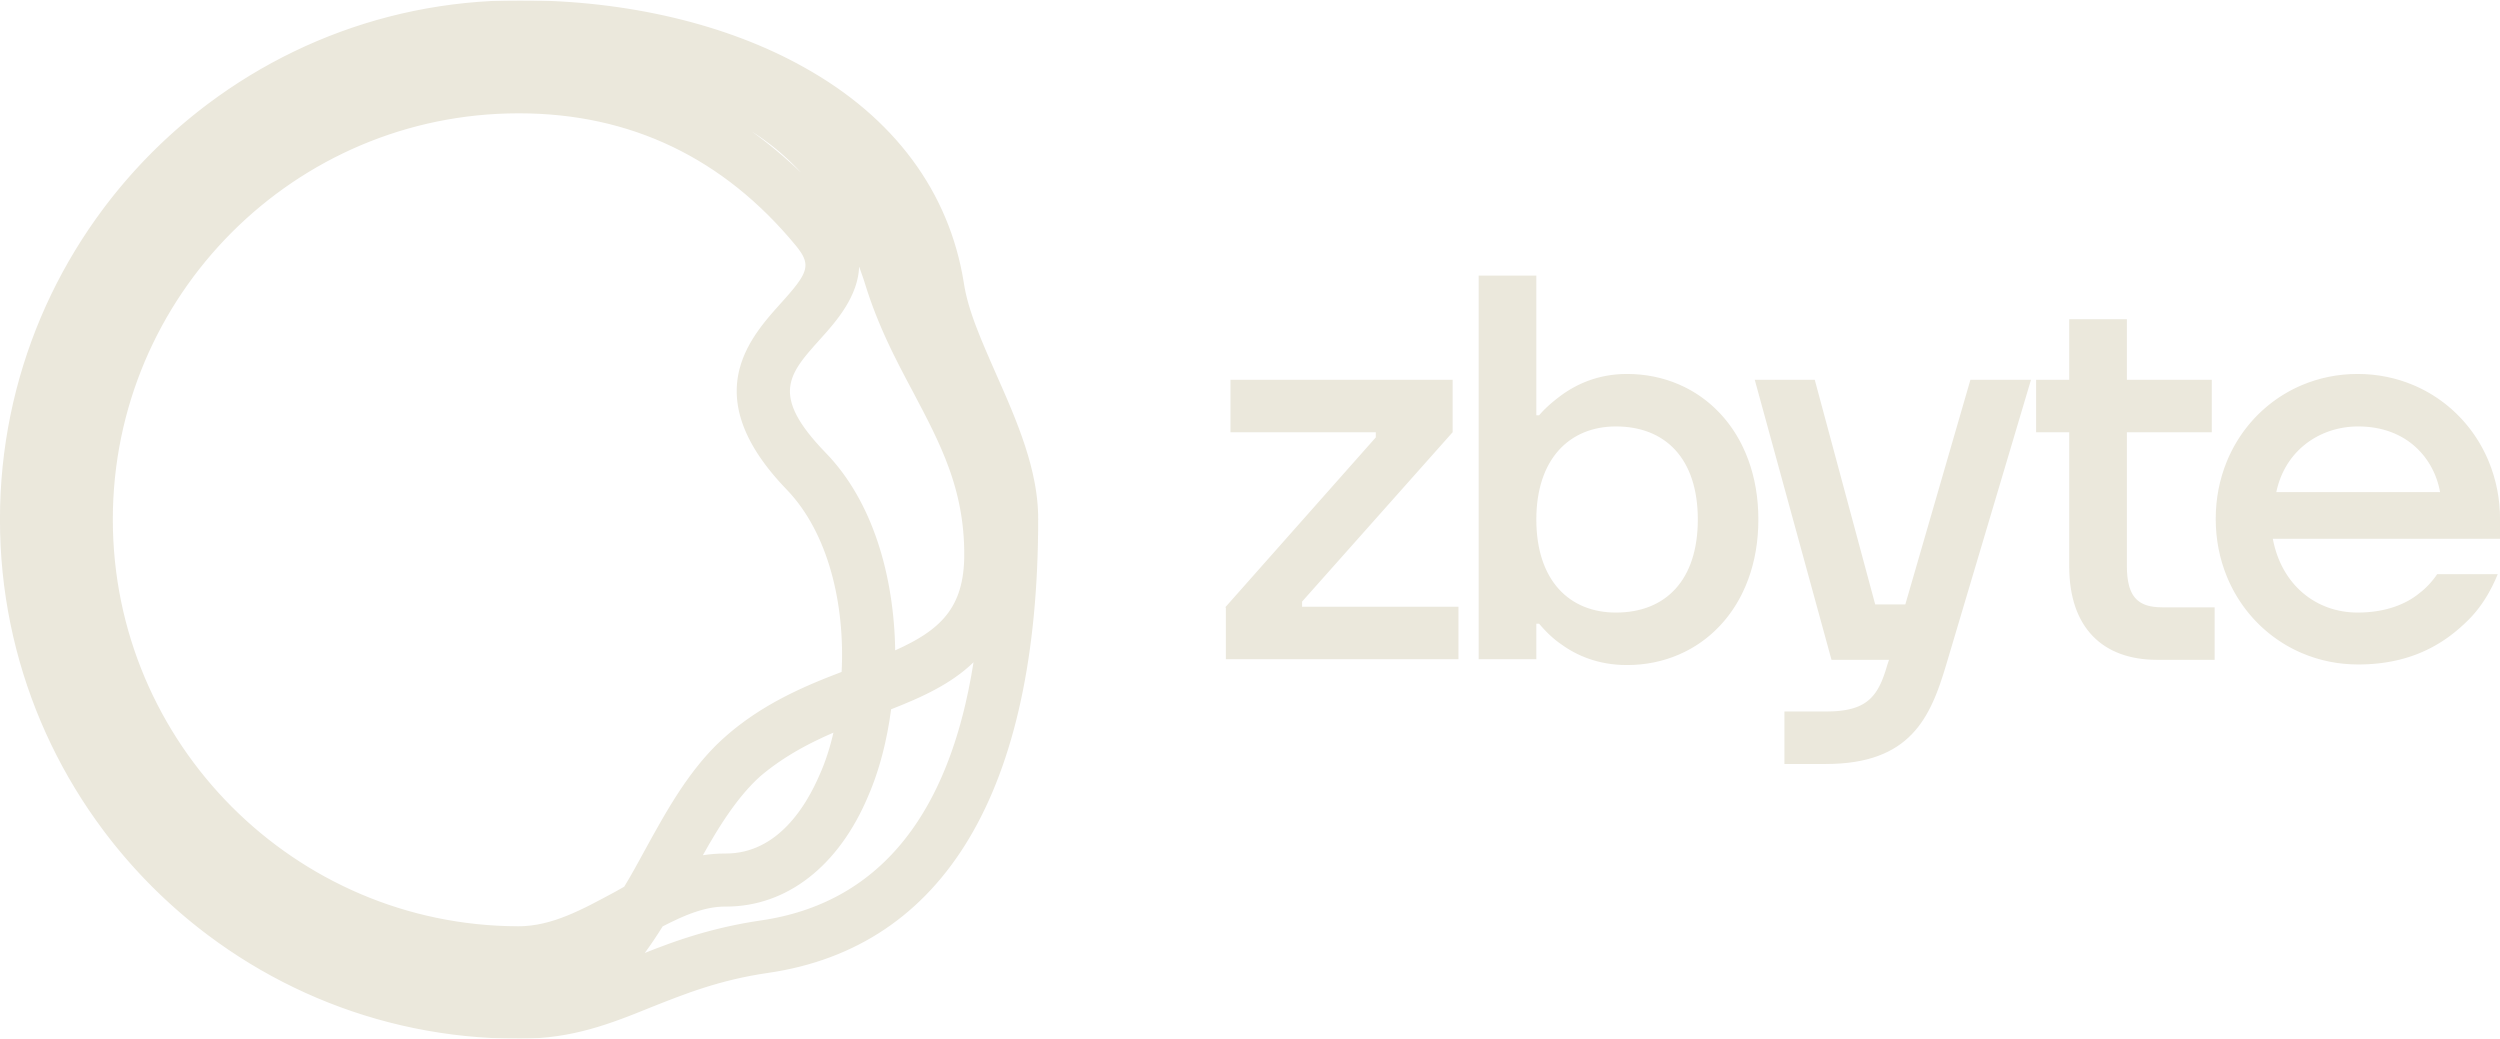 zbyte.png